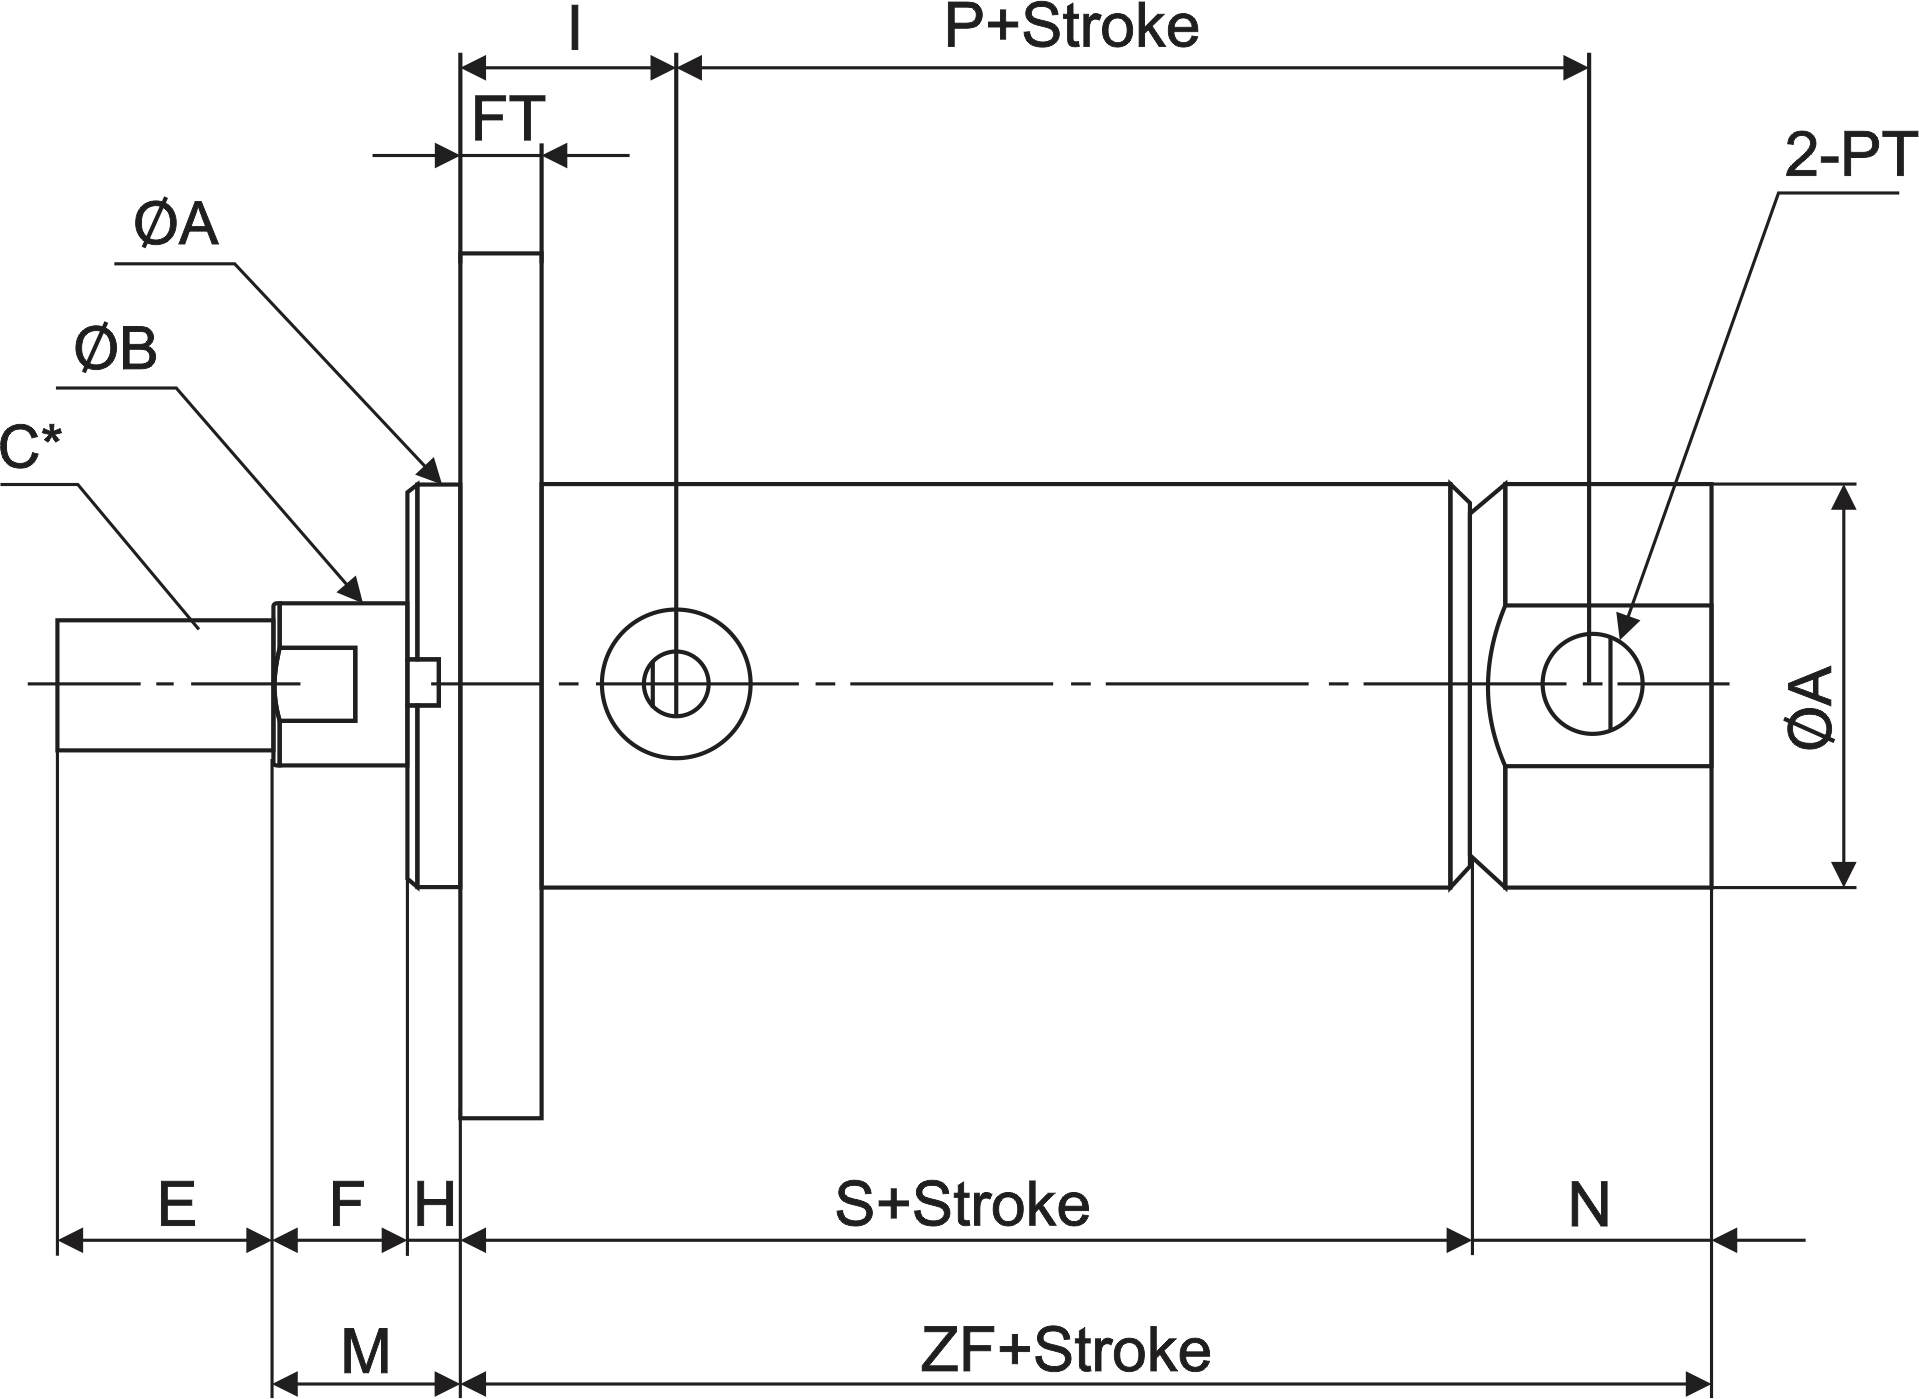 Jack flange circuit from the front of the round hydraulic crack model